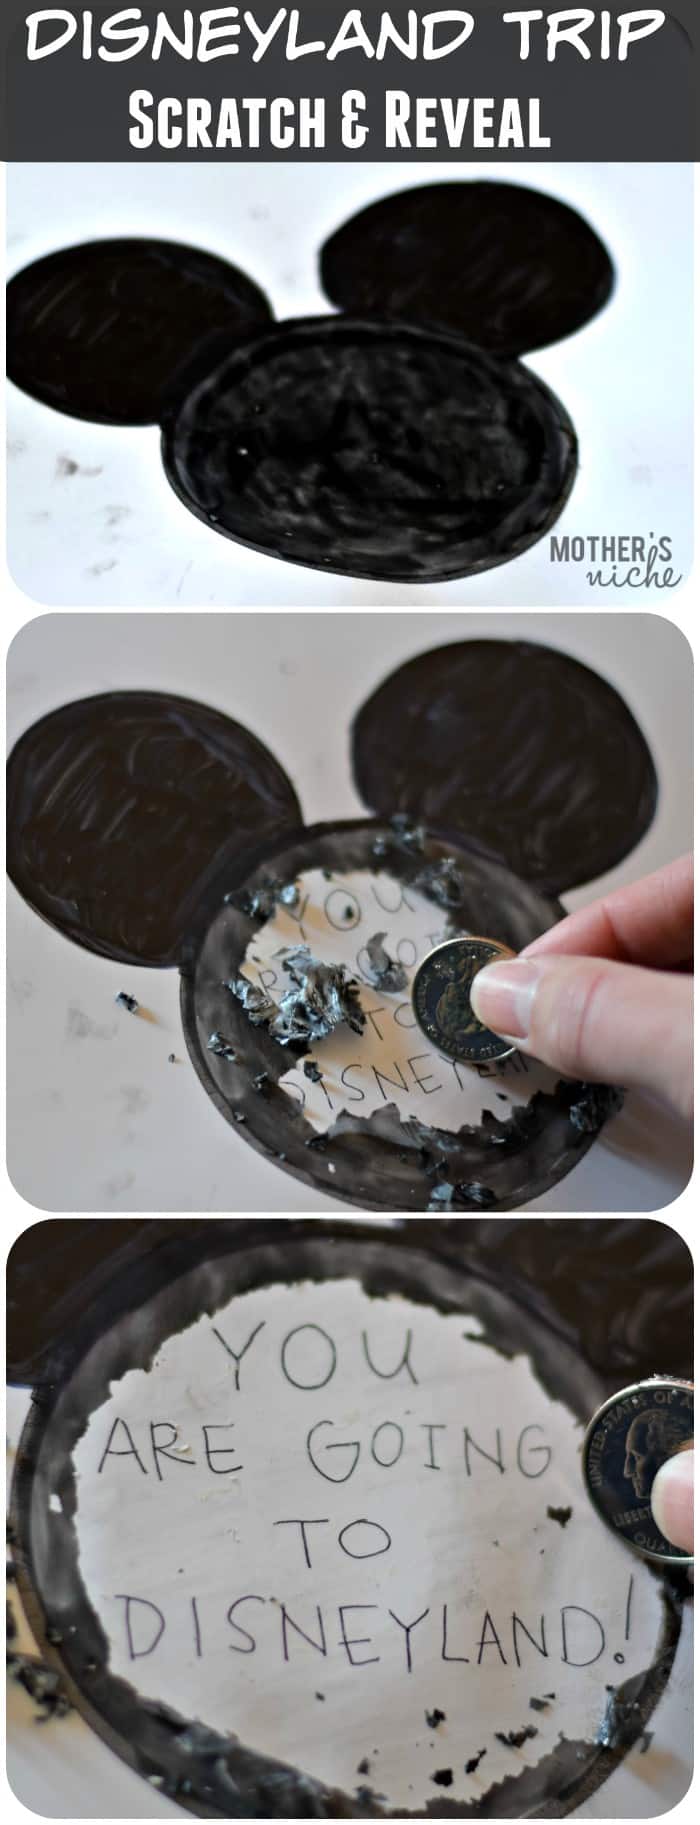 DIY Scratch & Reveal for surprising kids with a trip to DIsneyland. You can also use the free printable as a treasure hunt with the surprise at the end!